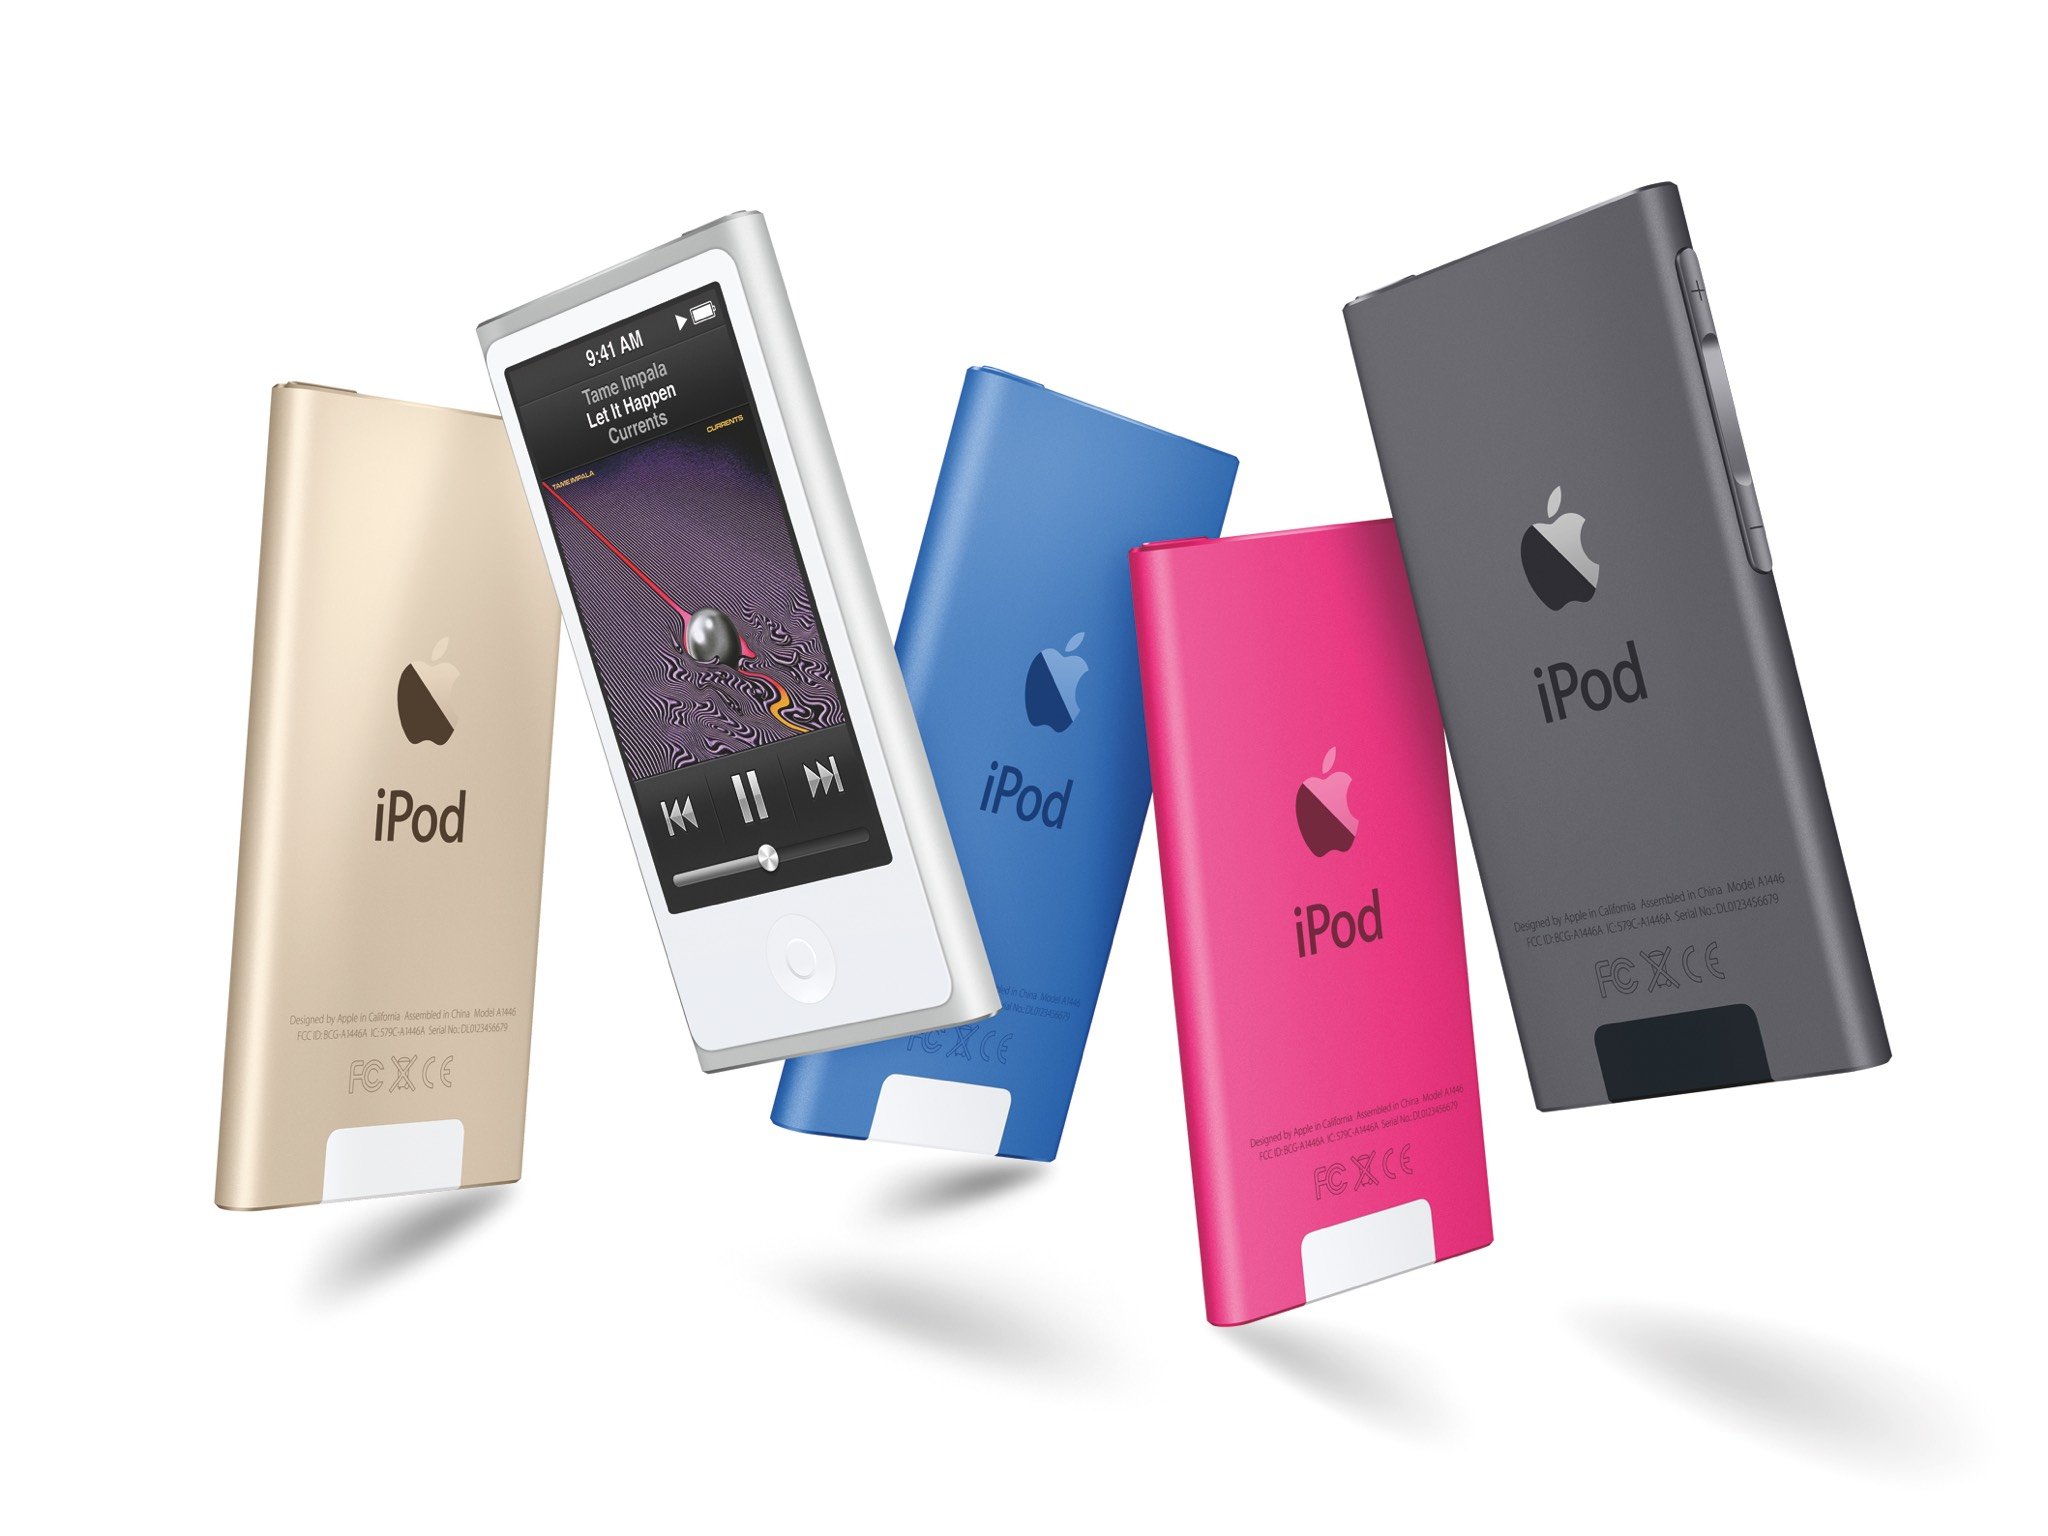 iPod nano and shuffle get refreshed with brand-new colors